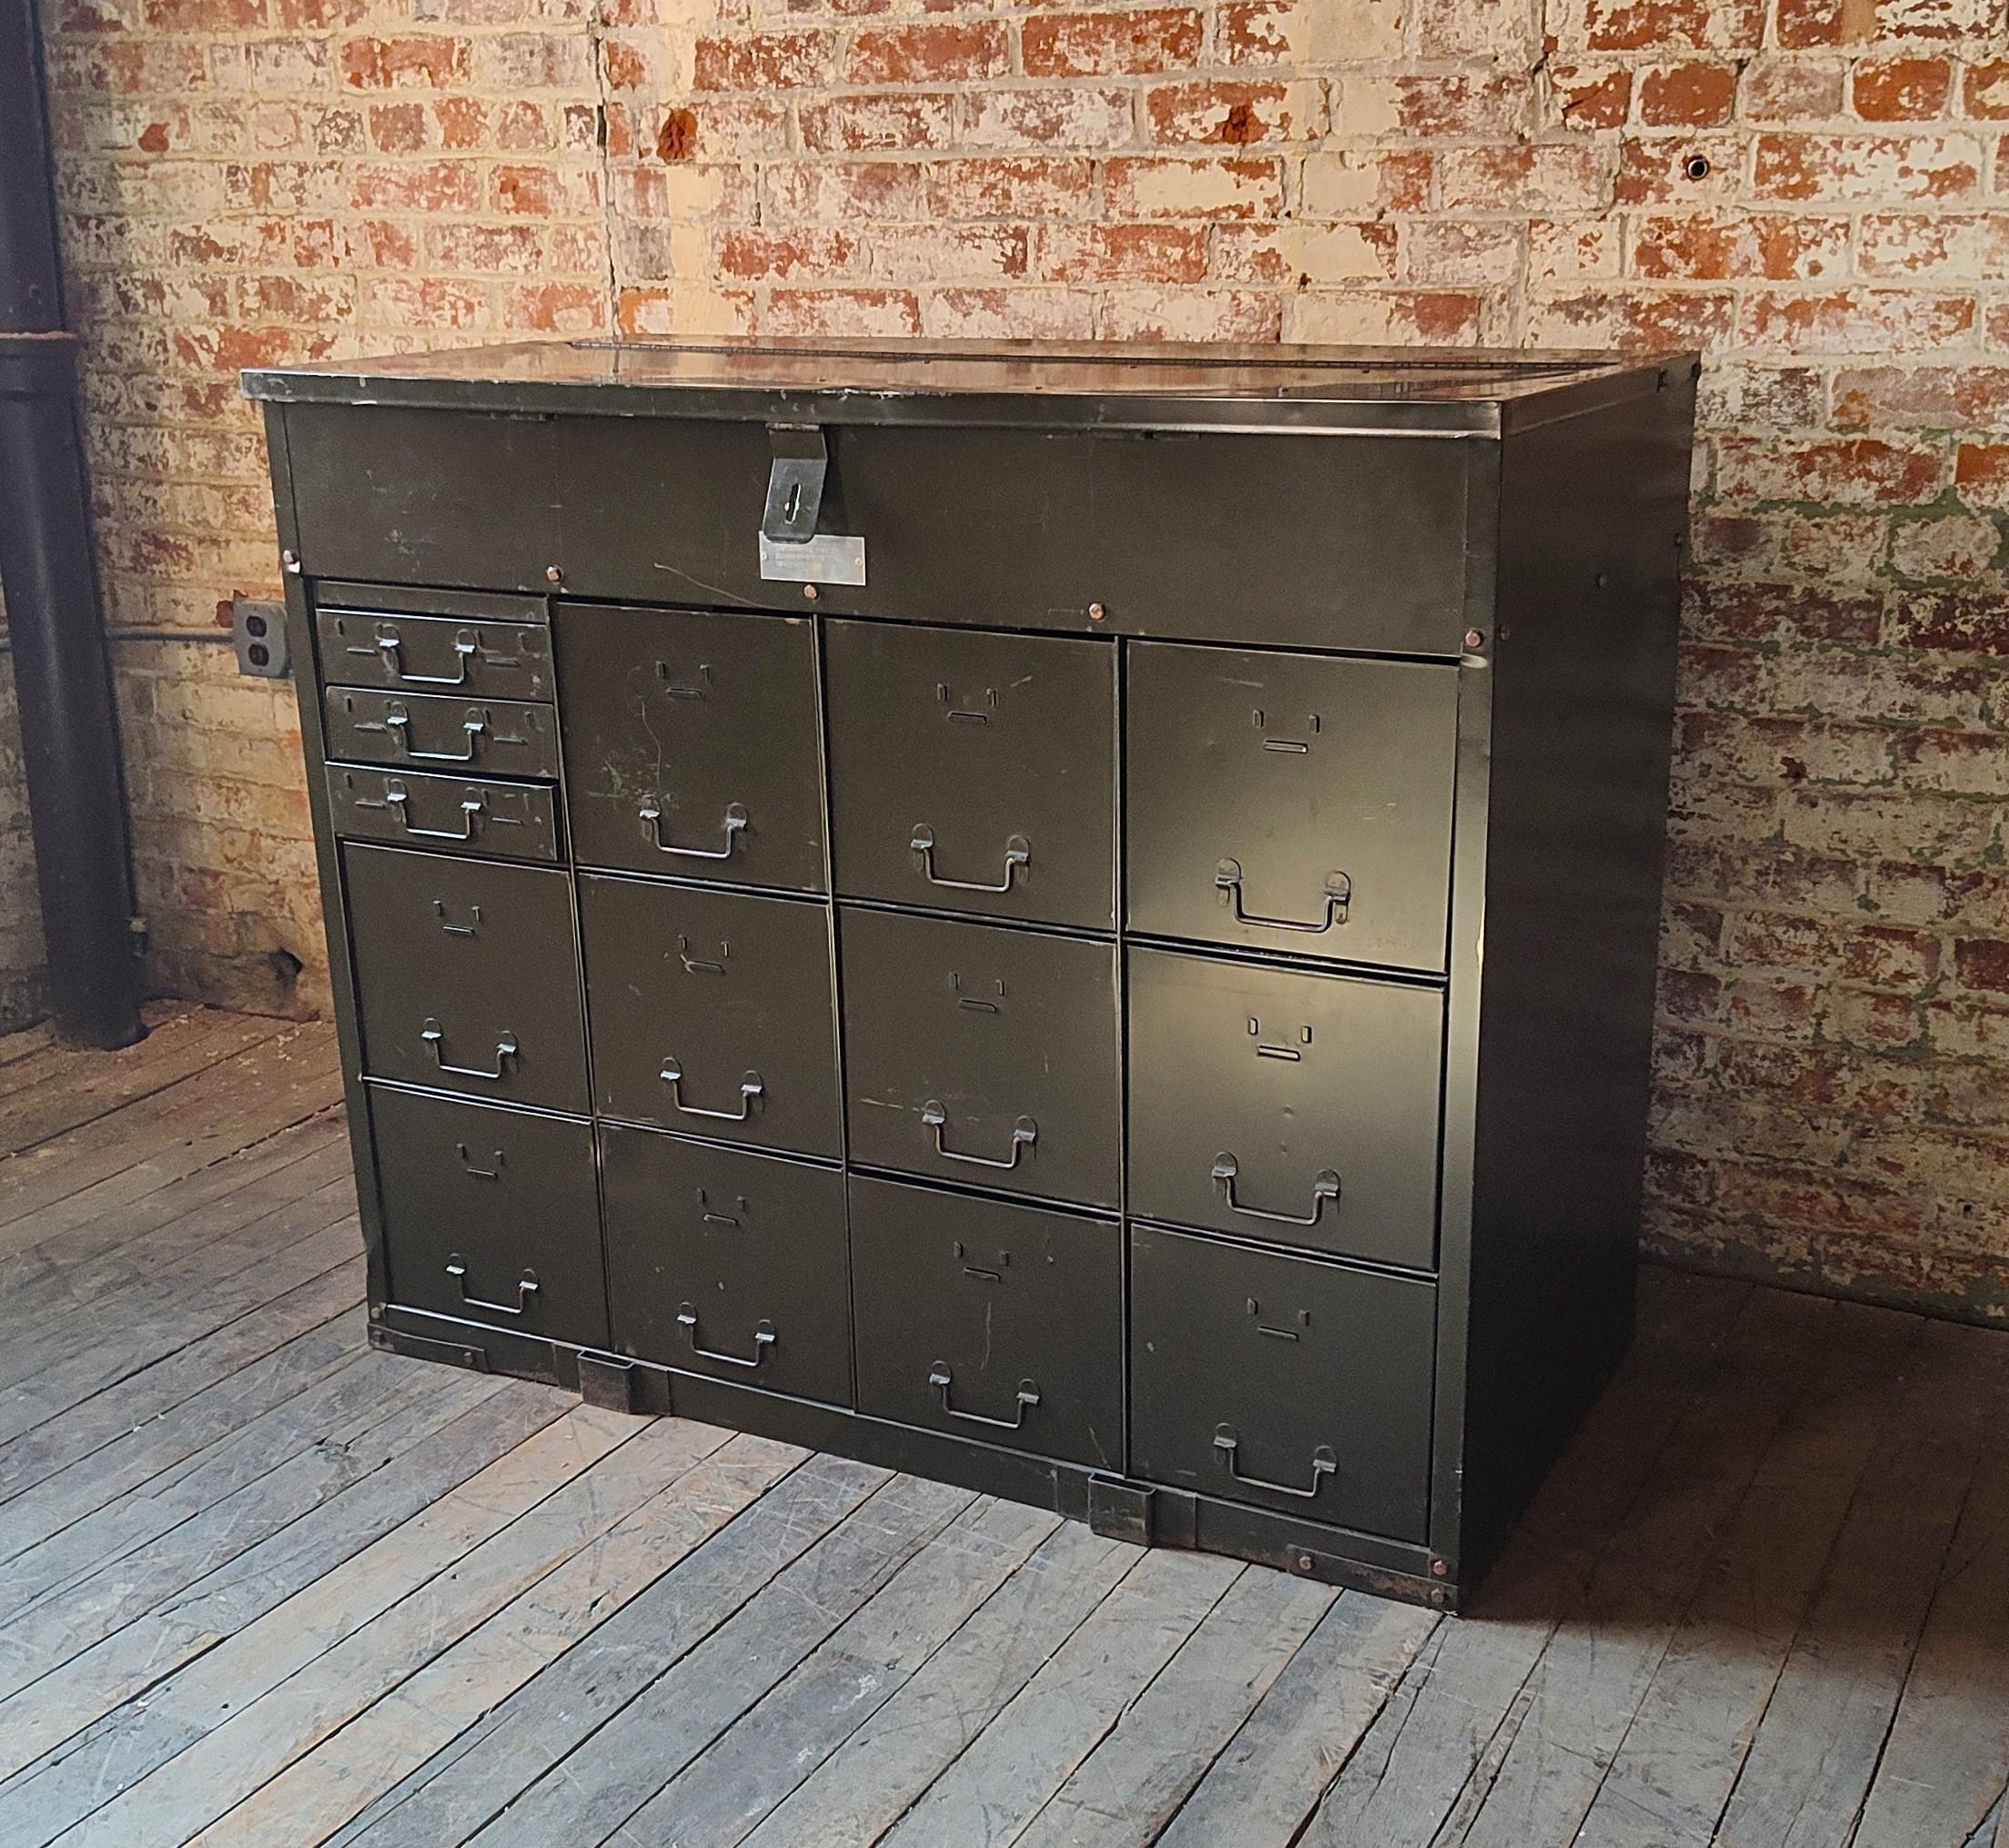 Military Cabinet

Overall Dimensions: 23 3/4